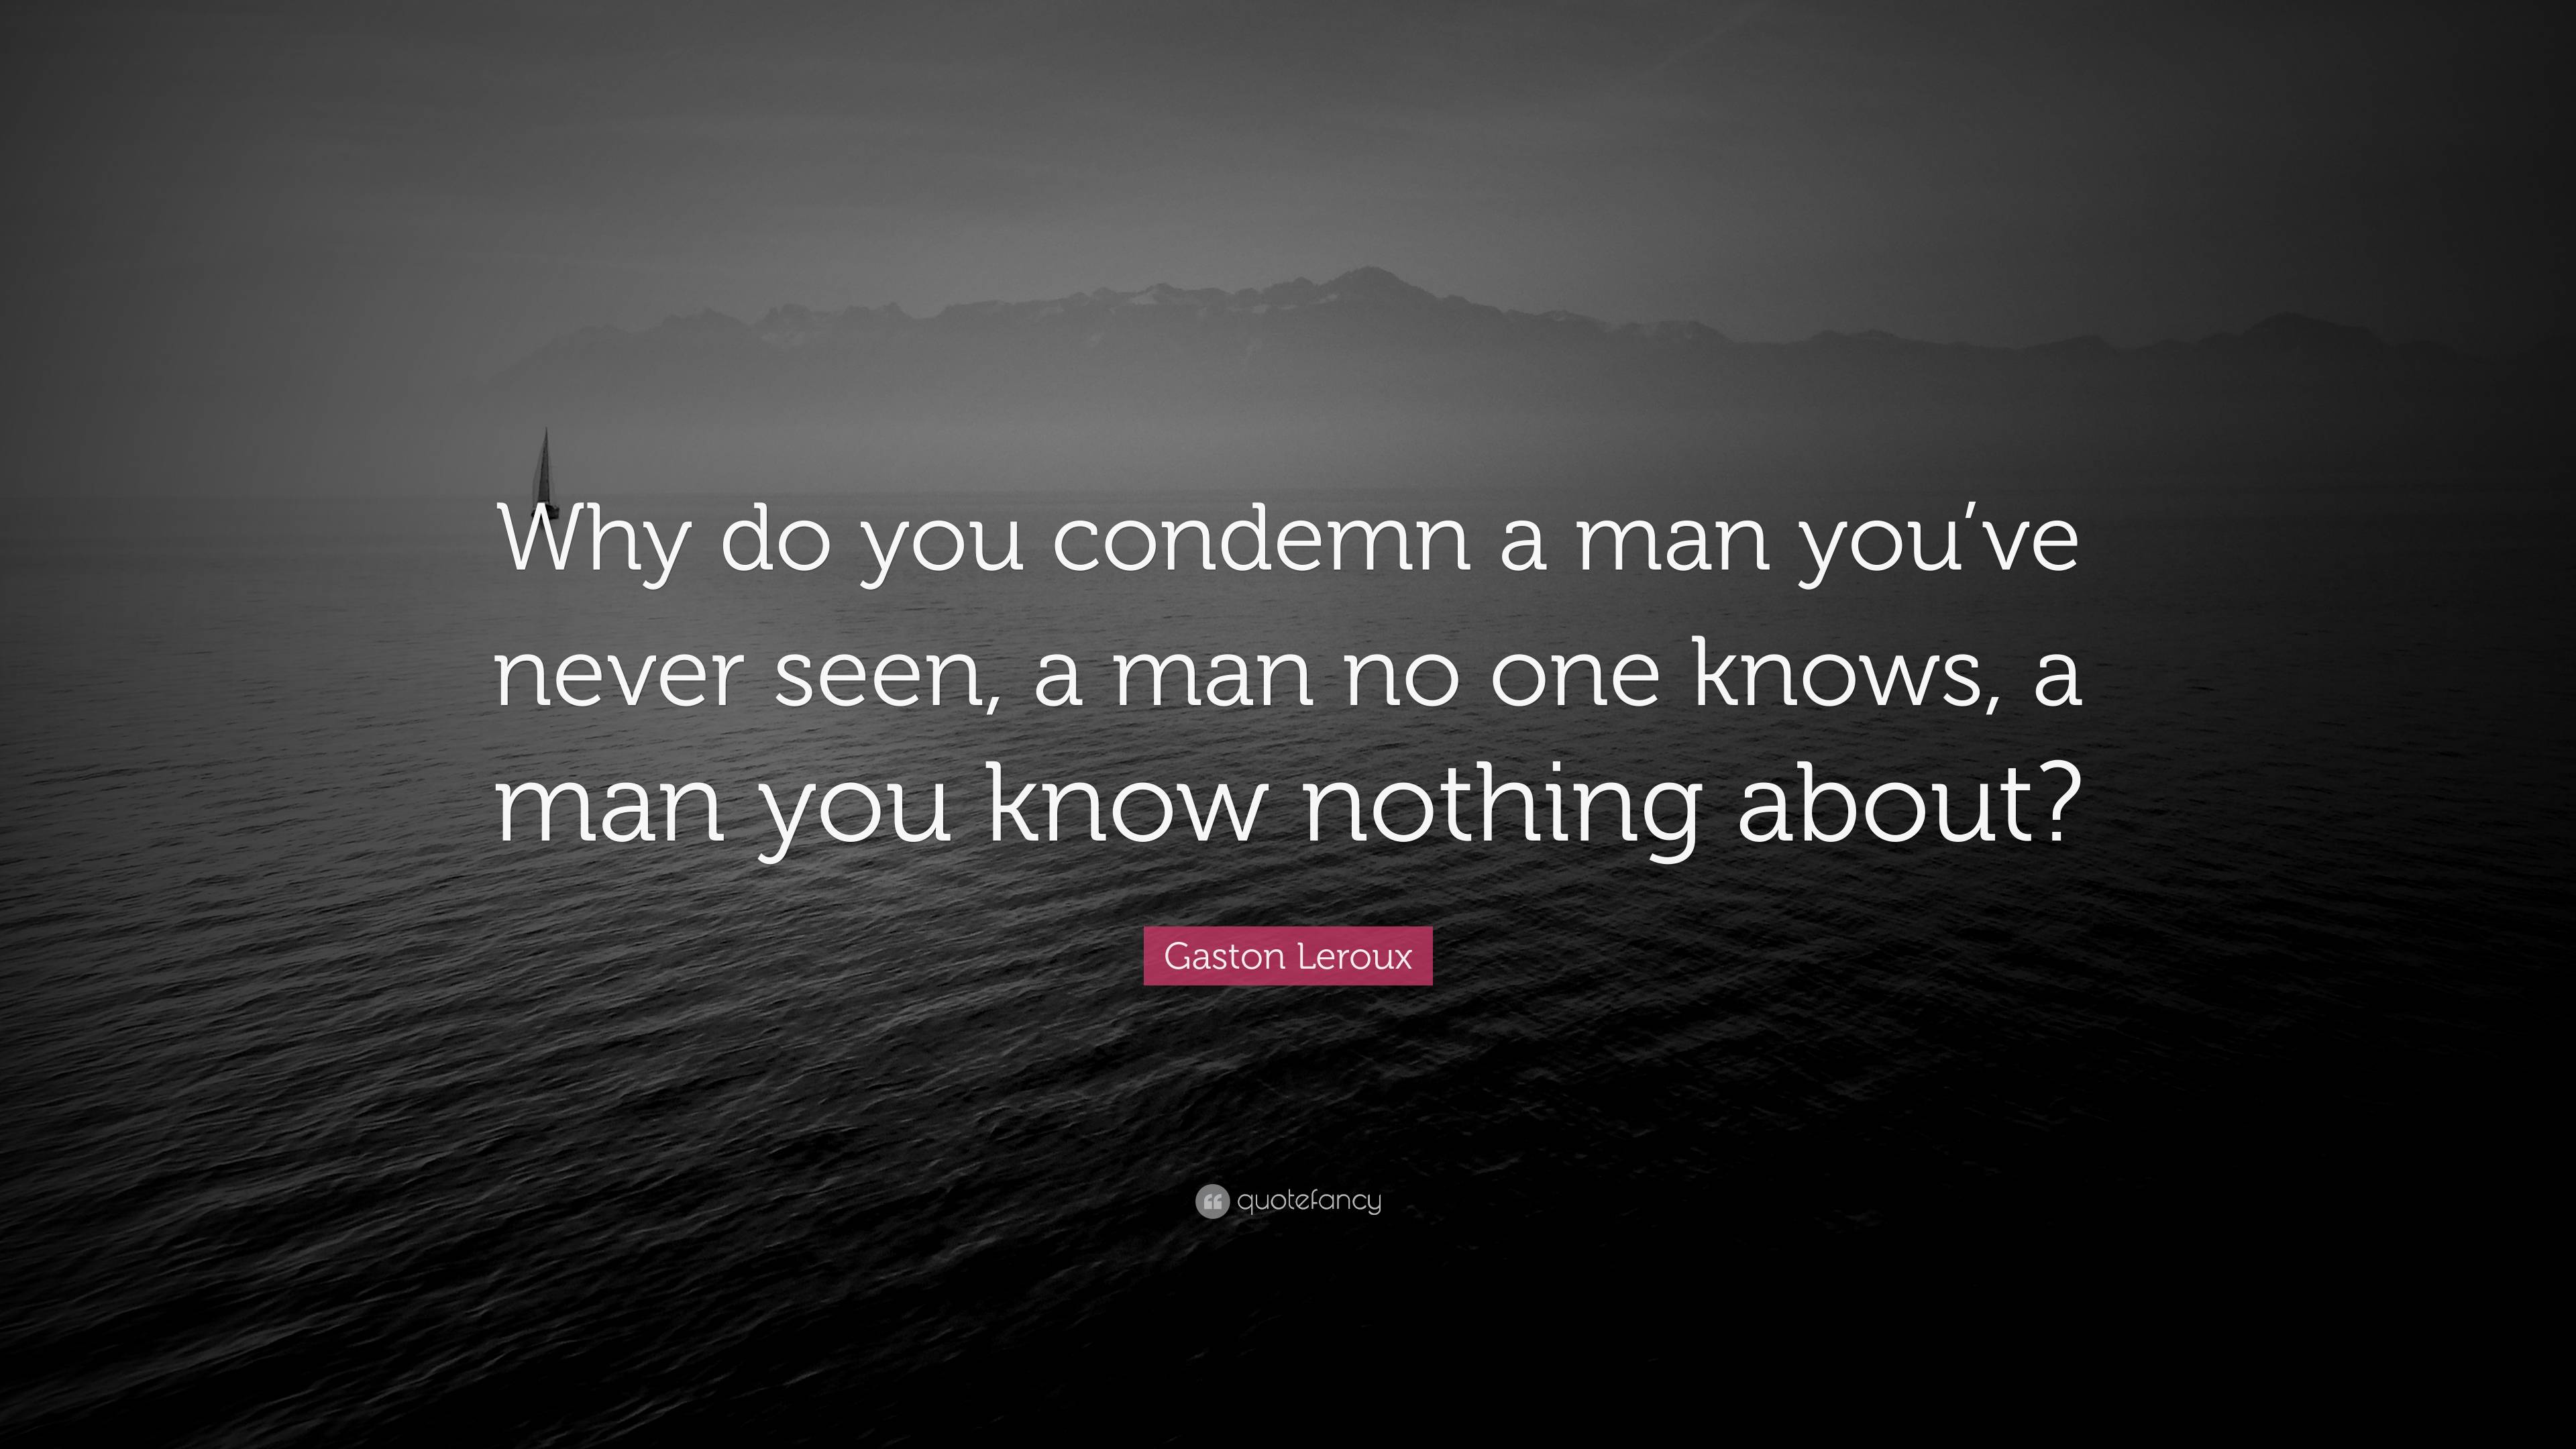 Gaston Leroux Quote: “Why do you condemn a man you’ve never seen, a man ...